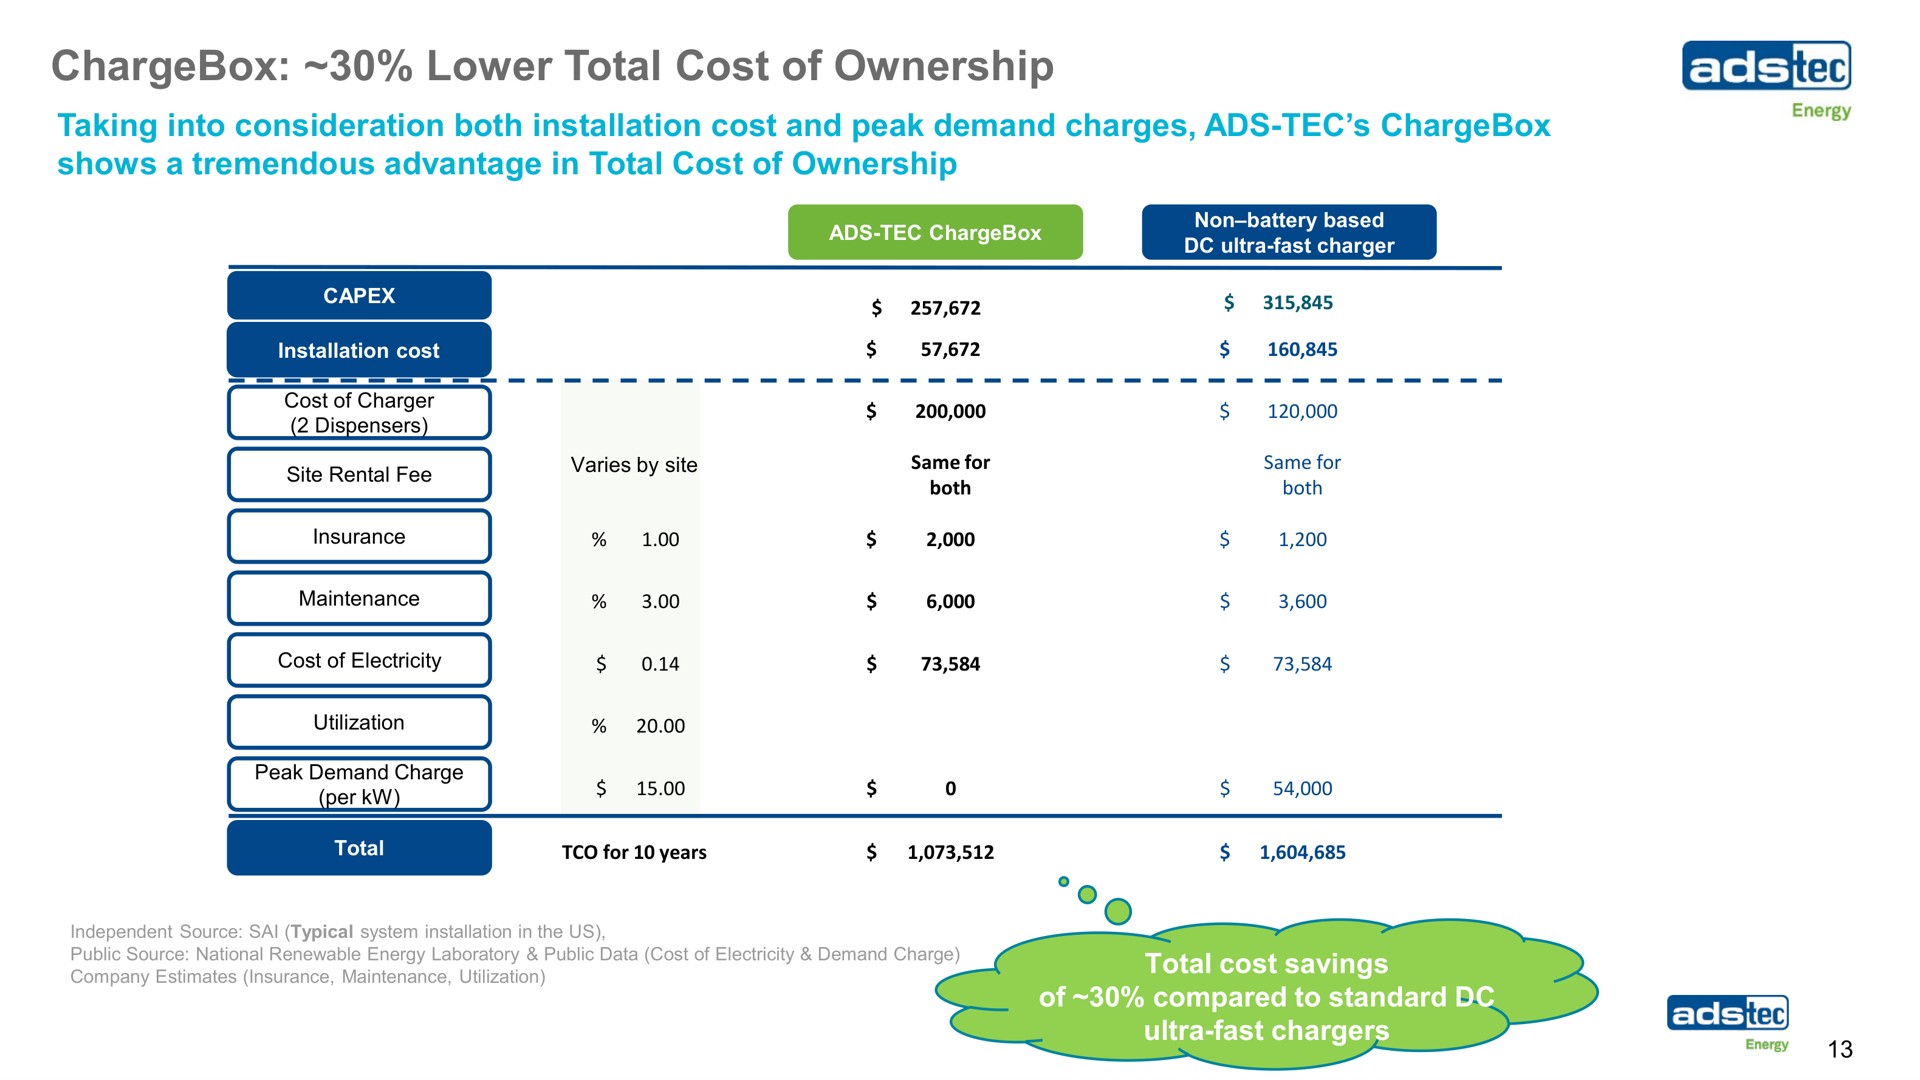 lower total cost of ownership | ads-tec Energy